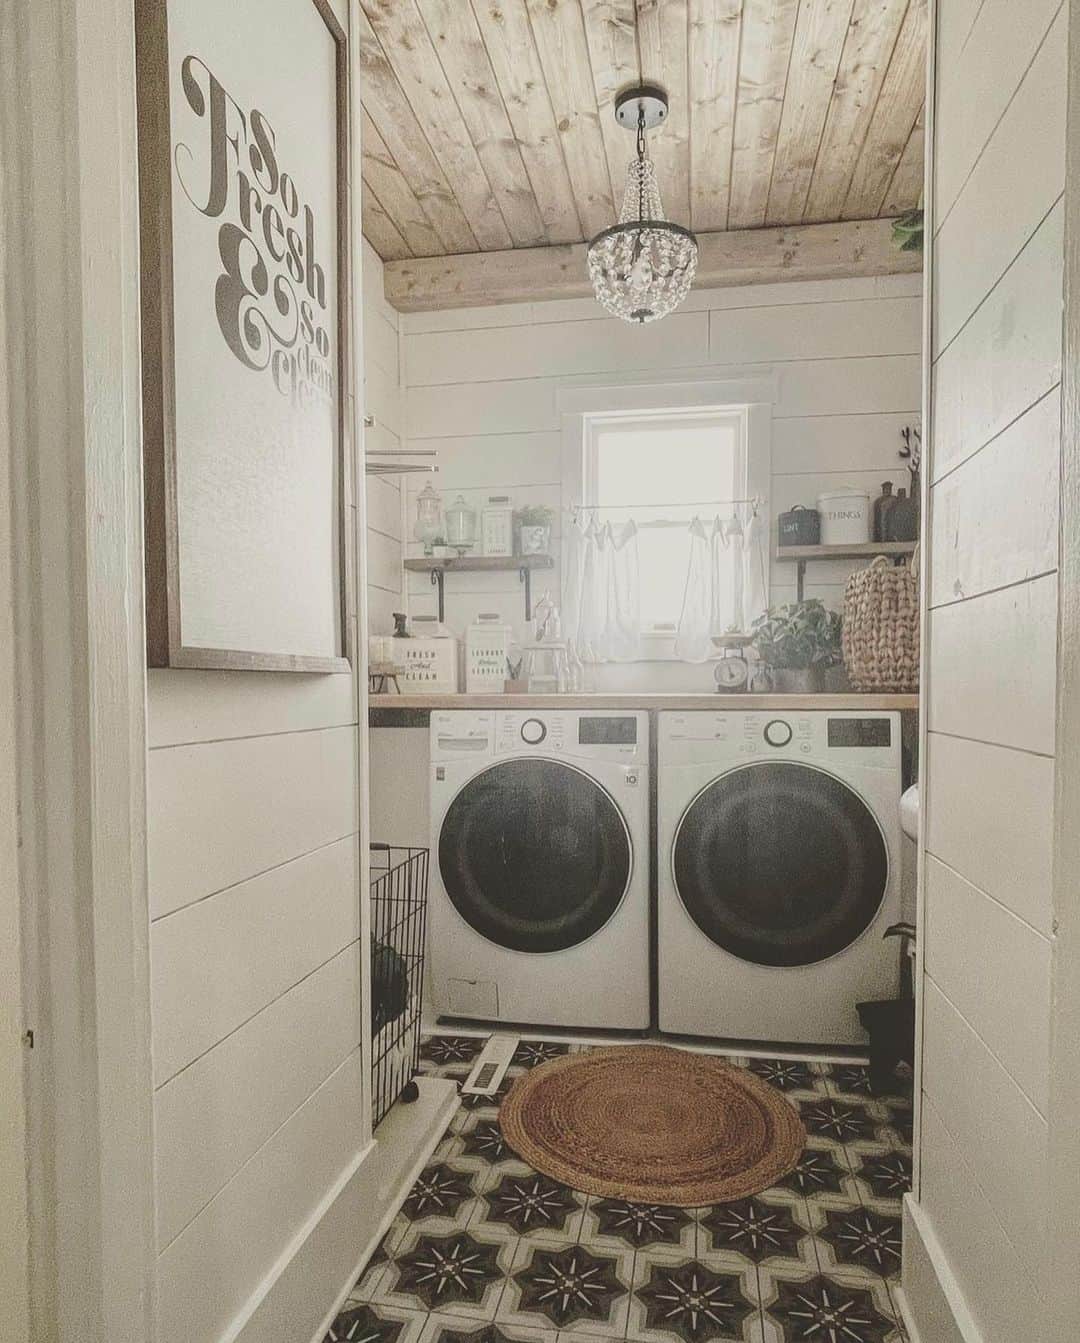 Wood Ceiling Laundry Room With Patterned Tile Floor - Soul & Lane